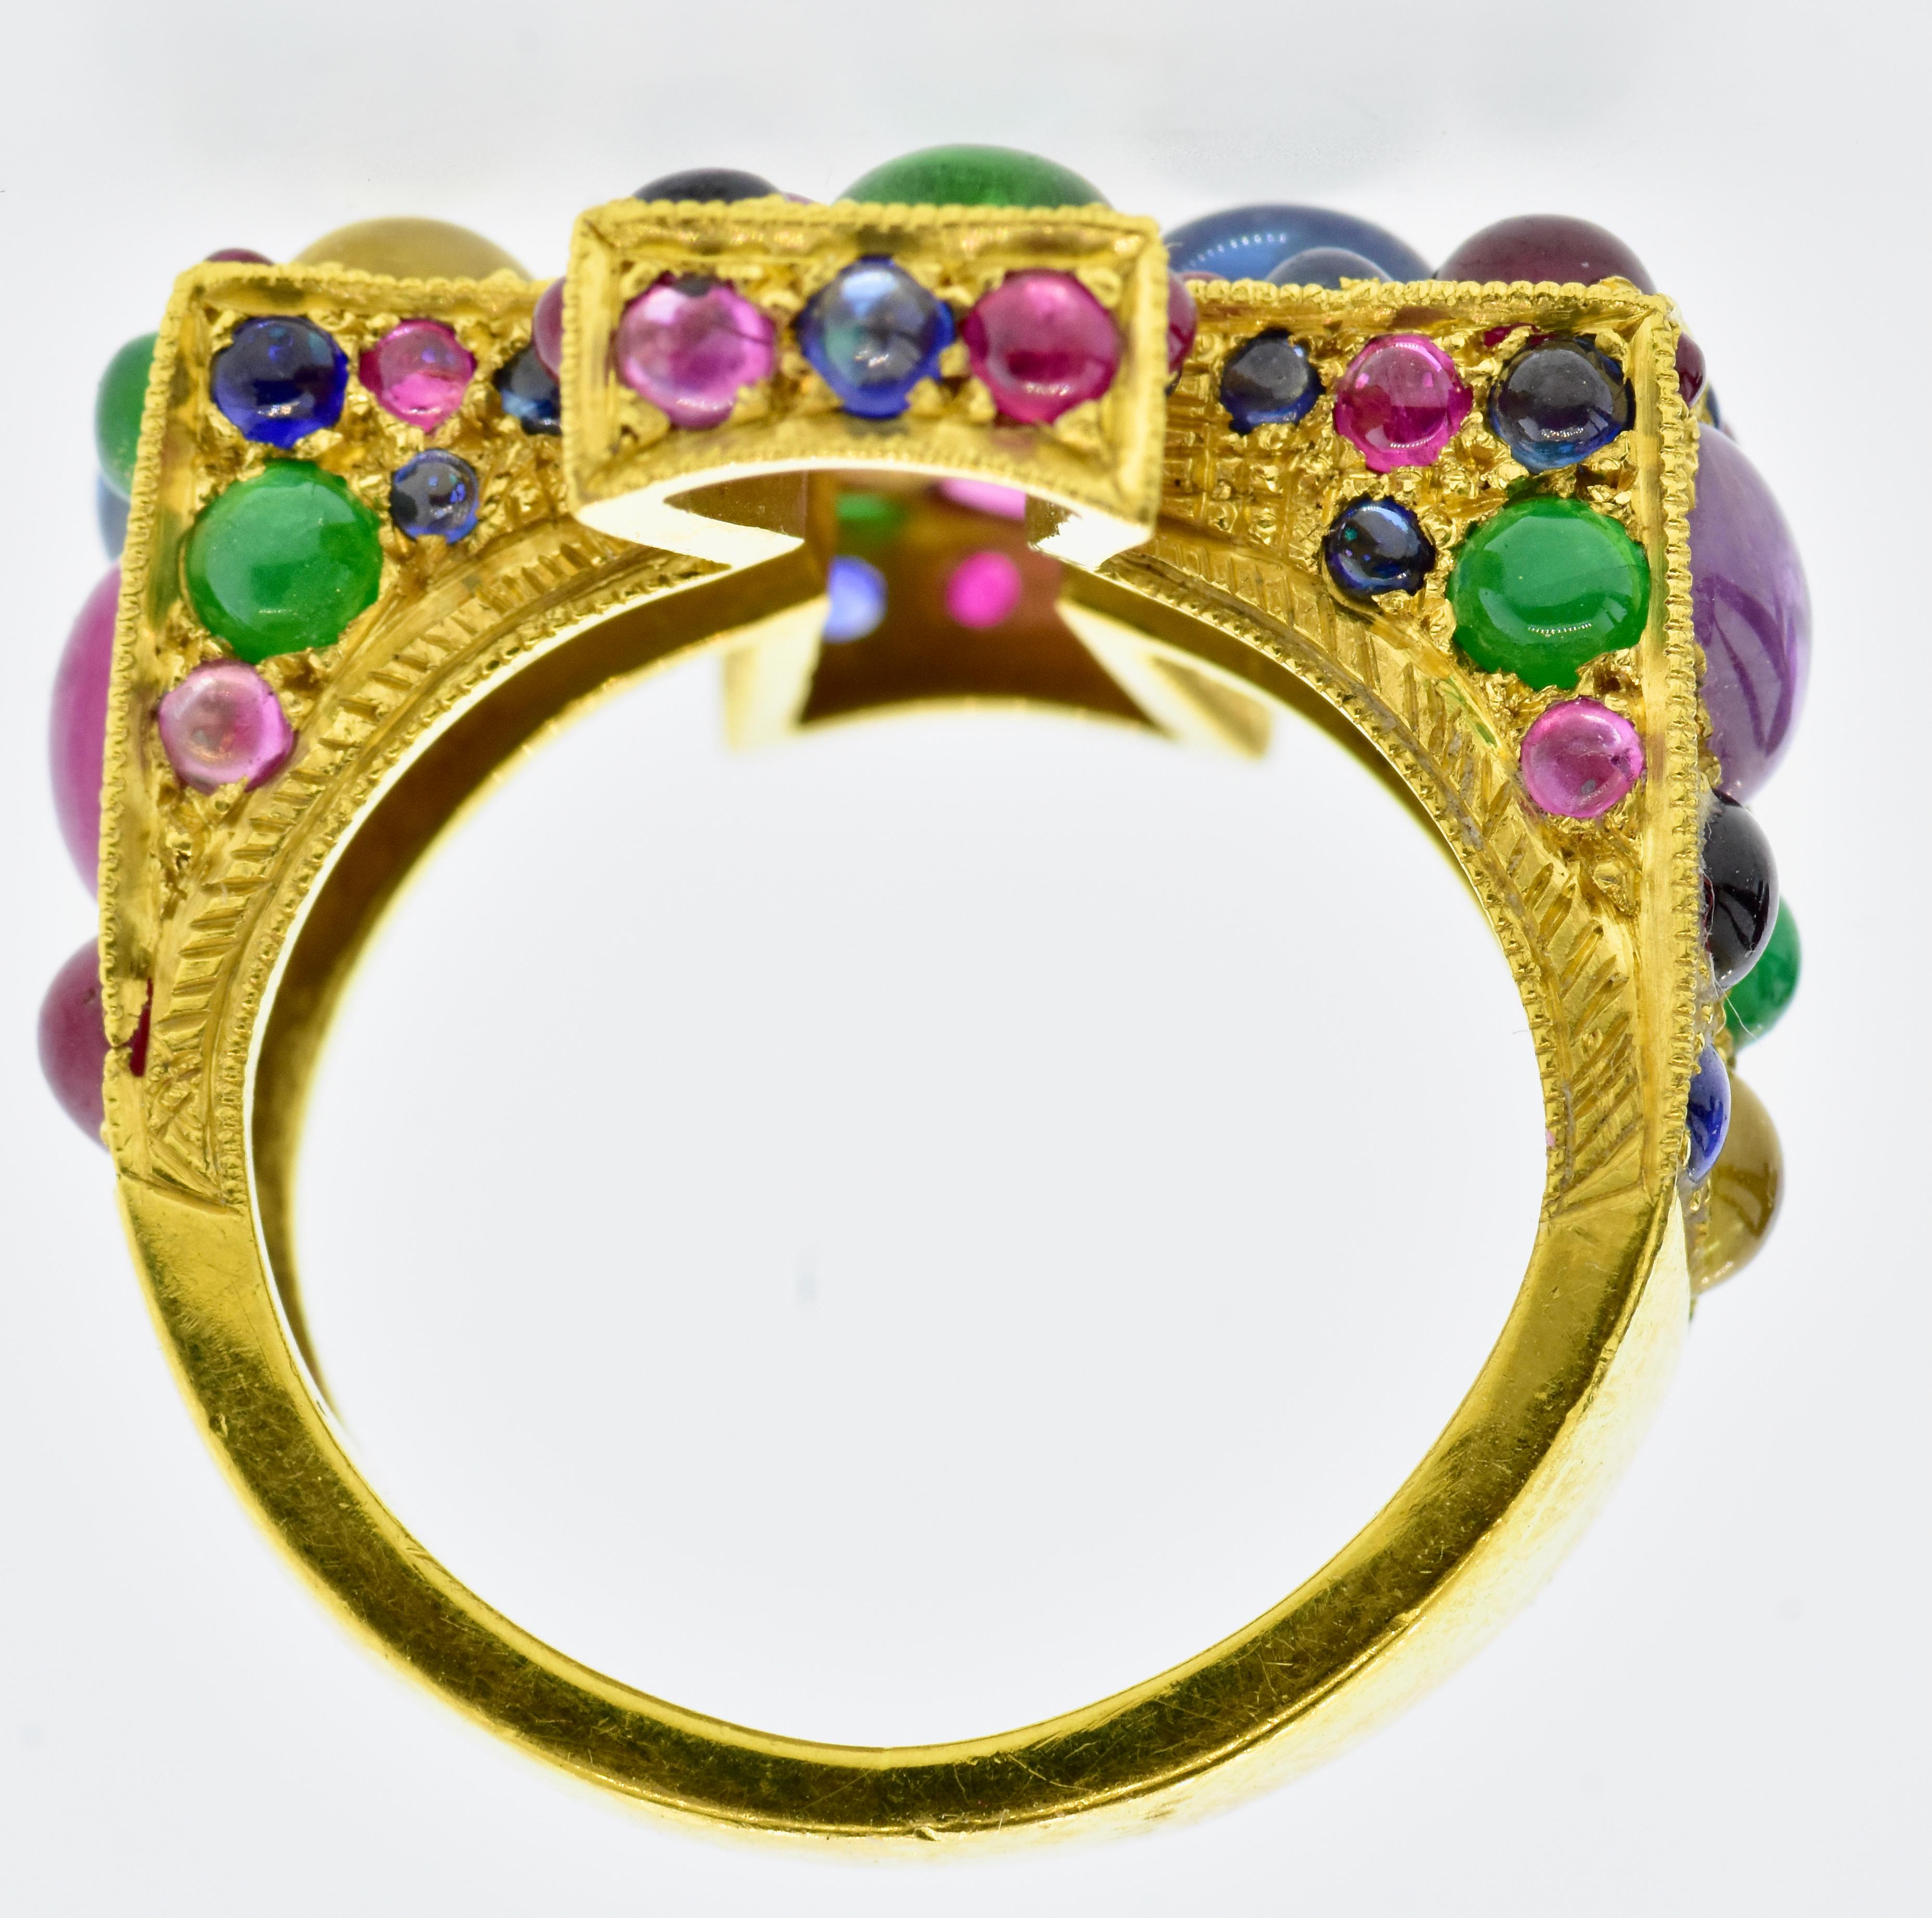 Women's or Men's Maltese Cross Ring Studded with Sapphires, Rubies and Emeralds, Fairchild & Co.